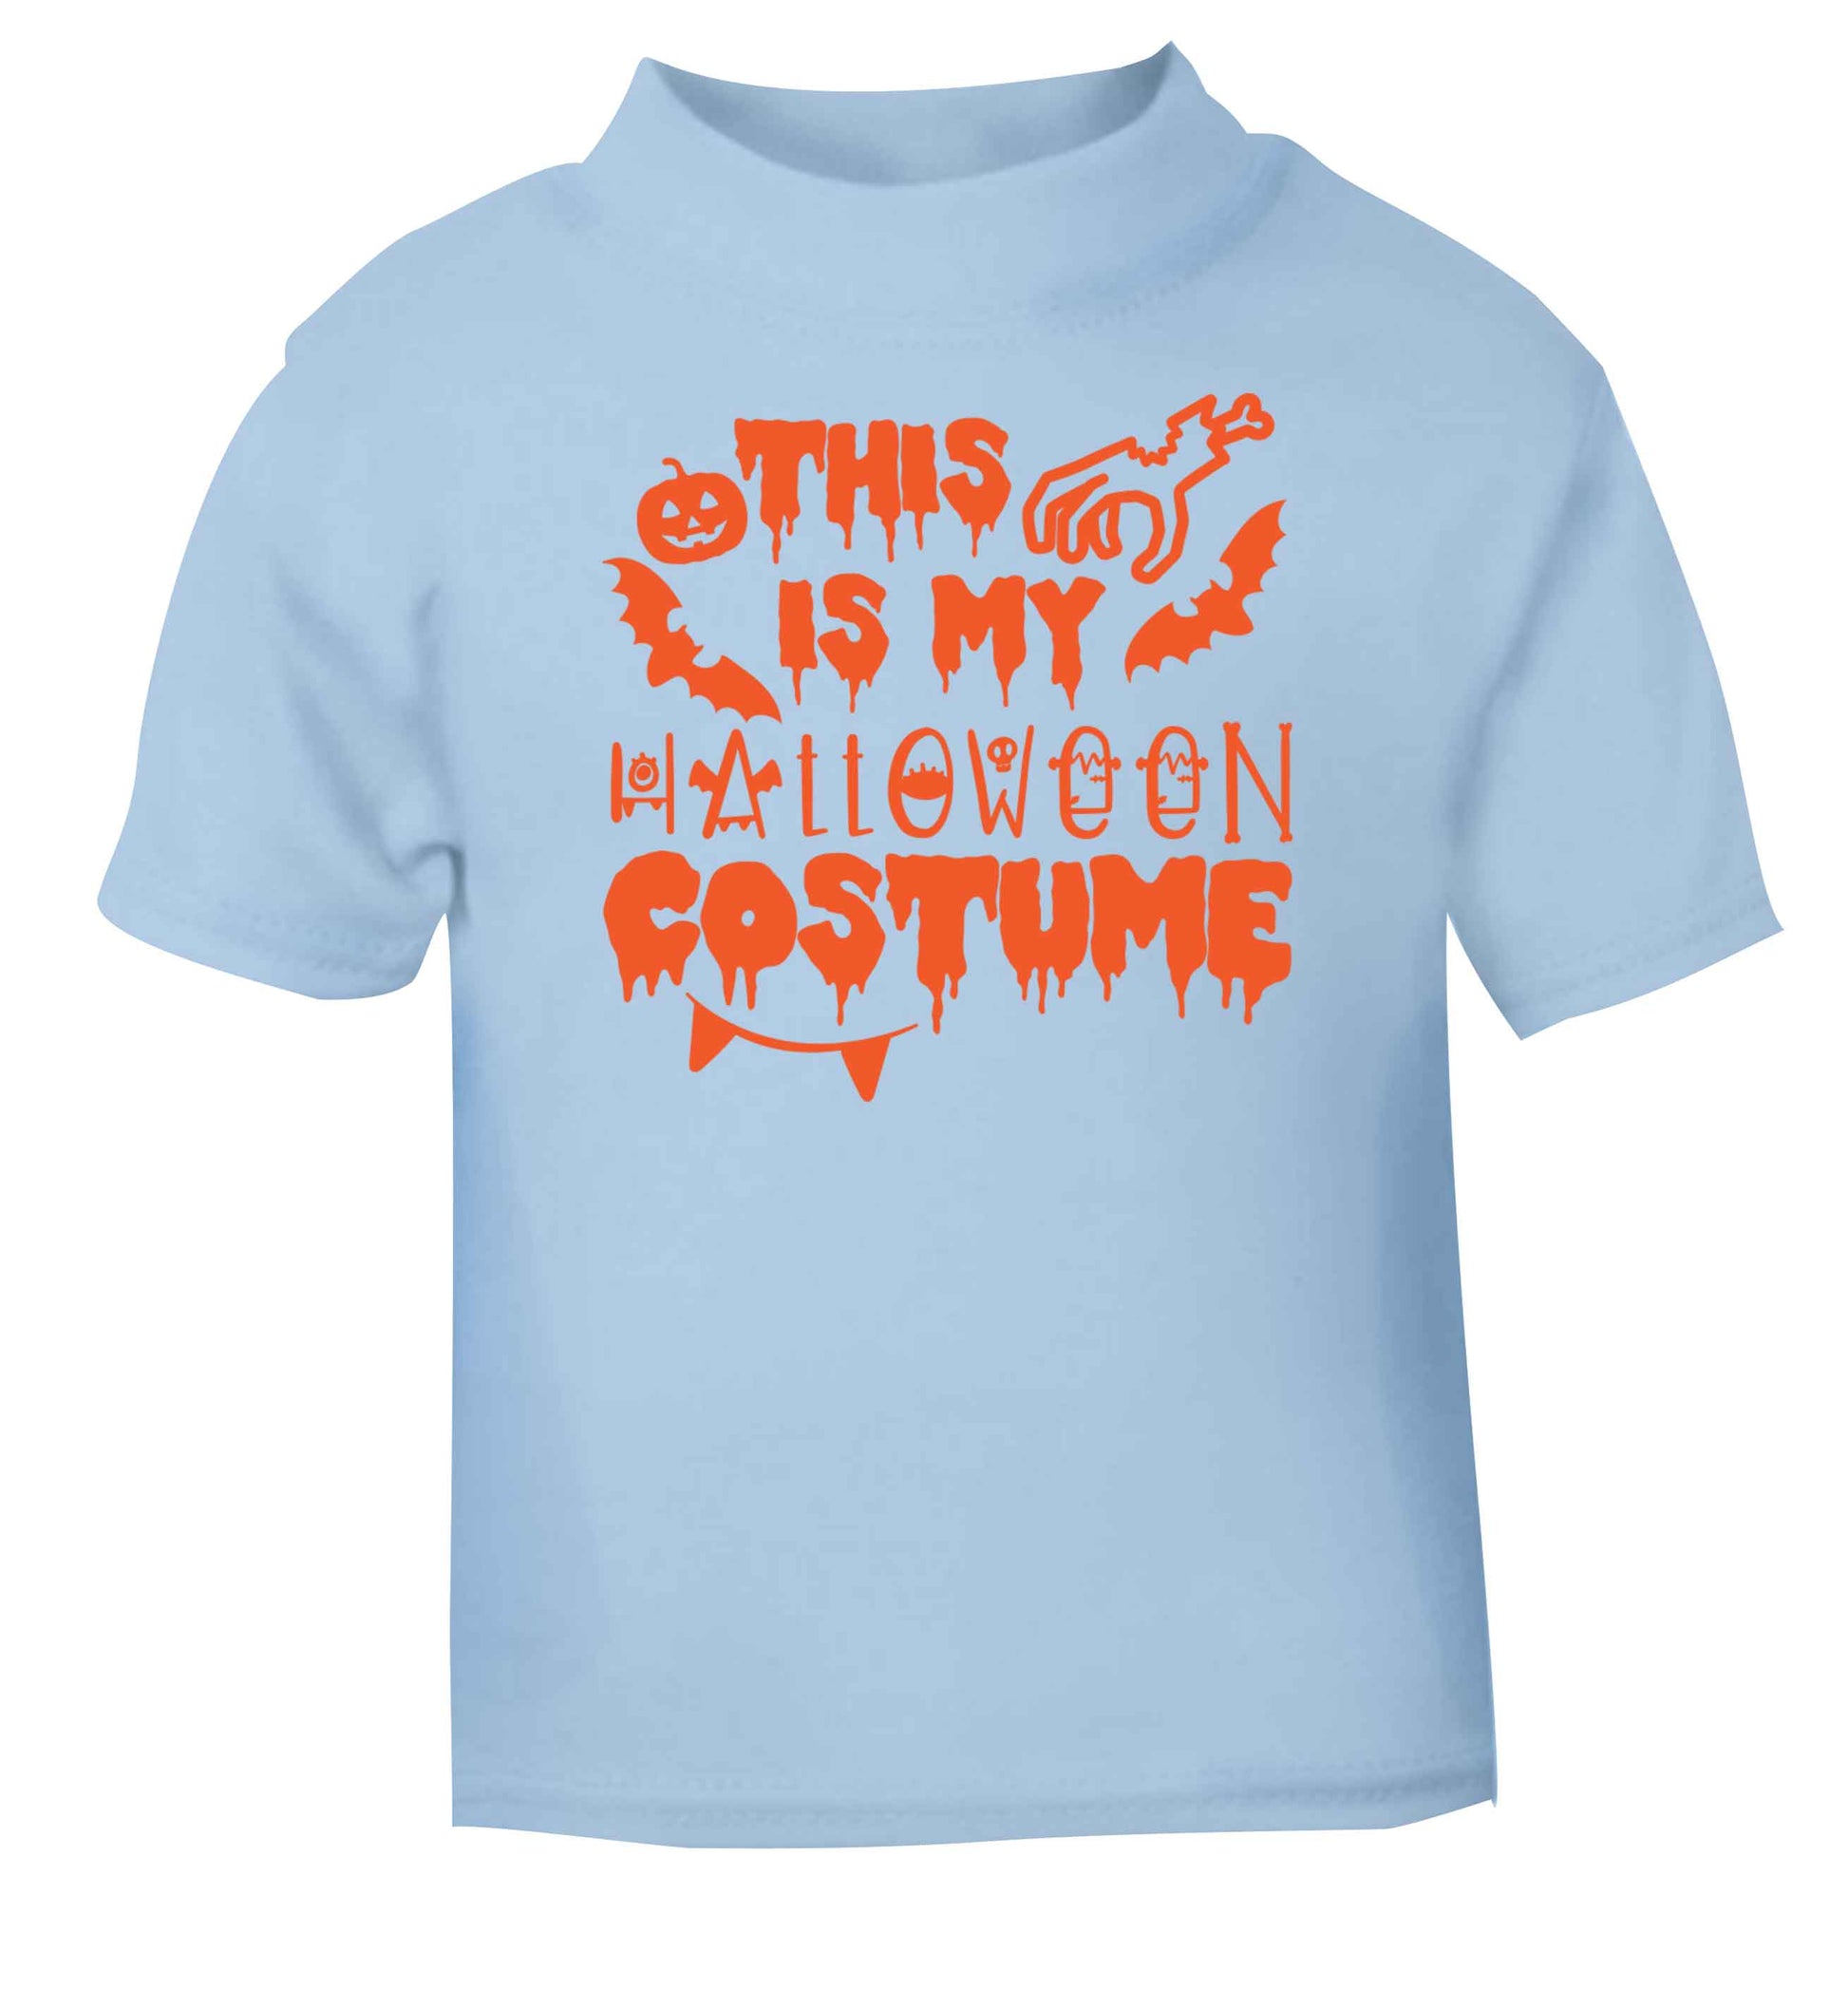 This is my halloween costume light blue baby toddler Tshirt 2 Years